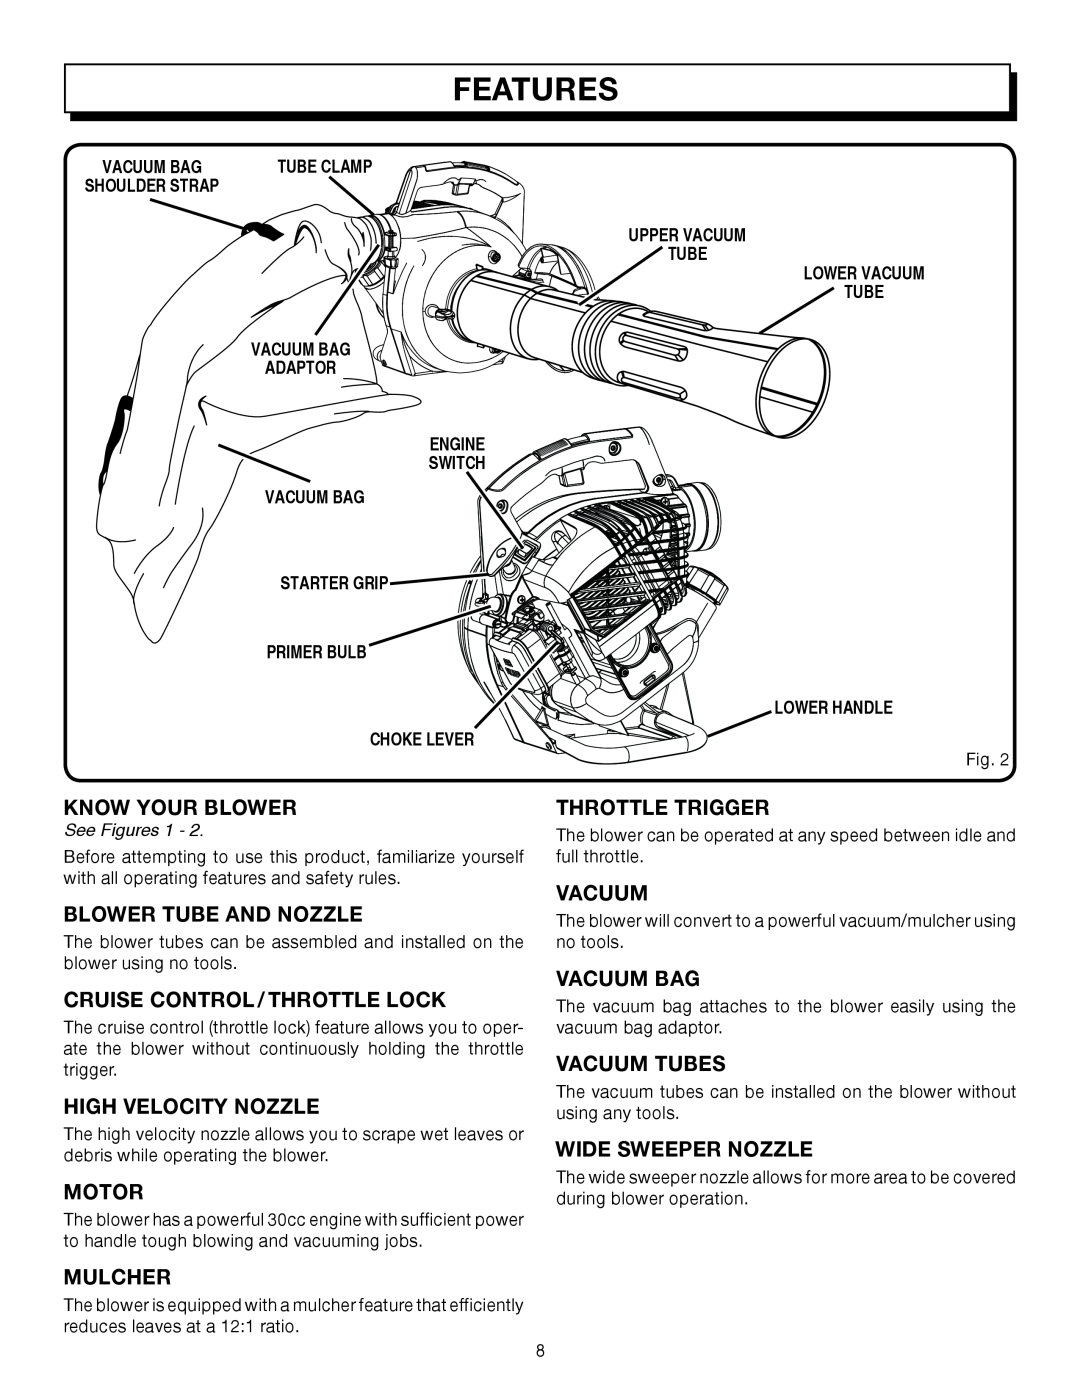 Homelite UT08542, UT08042 manual Features, Know Your Blower 